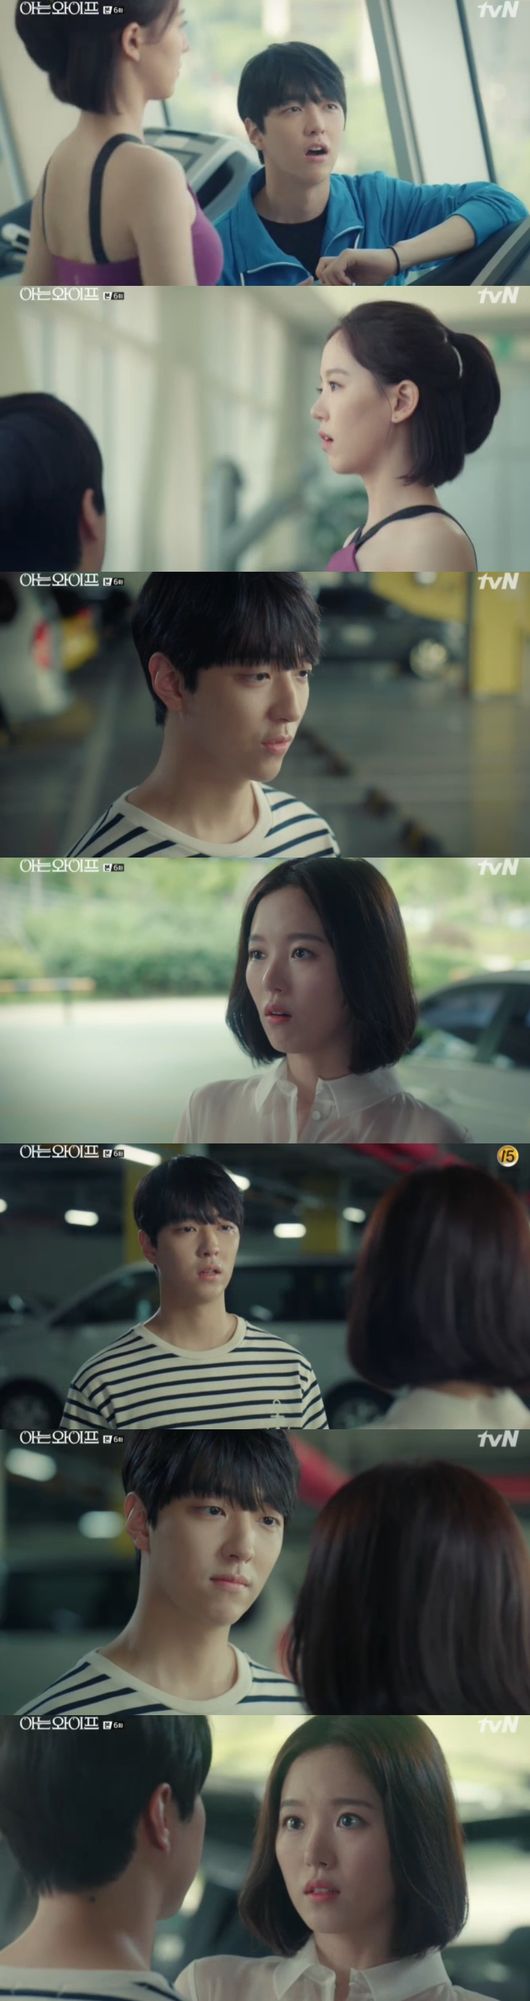 Kang Han-Na witnessed Ji Sung stroke Han Ji-mins head in Knowing Wife.Hye-won (Kang Han-Na) witnessed Ji Sung-mins skinship with Woojin (Han Ji-min) in the TVN drama Ai is a Wife (directed by Lee Sang-yeop, played by Yang Hee-seung) broadcast on the 16th.Hye-won was exercising at the gym and waited for his younger son. He finally appeared and said, Did you wait for me? Hye-won maintained his poker face, saying, No.After finishing the exercise, he followed him and said, Lets go with my sister. He was hungry and actively came out, asking for food.Hyewon said, You do not think you are anything. He confessed, Let me do something, my sister is good.Hyewon said, Are you really going out? And asked him to abandon his fantasies about his association. He said, I saw the ring before. Hyewon said, You should know, meet your age instead of wasting time.I do not know if it is my way, I have not done proper love, said Young-nam. I will do my best to put up with it.Hye-won only looked at the back of such a young man. He looked at Hye-won as he approached again, and Hye-won was a snow.It turned out that the younger brother and son had deliberately approached Hyewon by imitating the second generation of chaebol.World Bank told him about leadership education, saying that Ju-hyeok had to go, on condition that he should coach Woojin properly.I have to go to leadership education, and I said that Juhyuk has an important commitment.After the war, he drove with Woojin to the training center. He showed a thorough appearance by preparing lunch boxes.Woojin said, I have done a lot of love. After the end, I was embarrassed that I had no experience. At the school, the end met with the women I had met.Woojin noticed this, and the latter was embarrassed. He was busy explaining it.Woojin smiled and said, What are you explaining so hard, its all over the past, he said. Its cute, its more humiliating not to have a love affair at that age.Joo Hyuk went to the common sense.I called the end of the day, but I did not answer the phone, and the common sense said, It seems to be doing a great job. Suwon FC, where love blooms.Juhyuk imagined the two and headed for Suwon FC in the taxi at that time.After the ceremony, he ignored Juhyeok and drank Woojin and wine. Juhyuk was worried about Woojin, which was weak.After the end, he asked Woojins movie taste. Joo Hyuk predicted I wonder, melodrama, but Woojin replied differently, Its a comedy.When I want to cry, I cry with melodies when I have no excuse. I do not want to show weakness, so I have a strong pride.Joo Hyuk recalled Woojin, who was tearful while watching a melodrama in the house, and then I was sorry to know why.The next day, the two met in front of World Bank, greeting each other casually. Woojin avoided Juhyeok, saying, I have something to live in a convenience store.He refused to do it if he tried to help him. But he was open to help.Ju-hyeok became late at night, and to Woojin, who was leaving late, Ju-hyeok said, Thank you, go carefully, and Woojin felt like a familiar voice.I have something to check, he said to Juhyuk, I am really sorry, and stroked his head with Juhyuks hand.Hye-won, who came to Ju-hyuk, witnessed two people and called them honey.